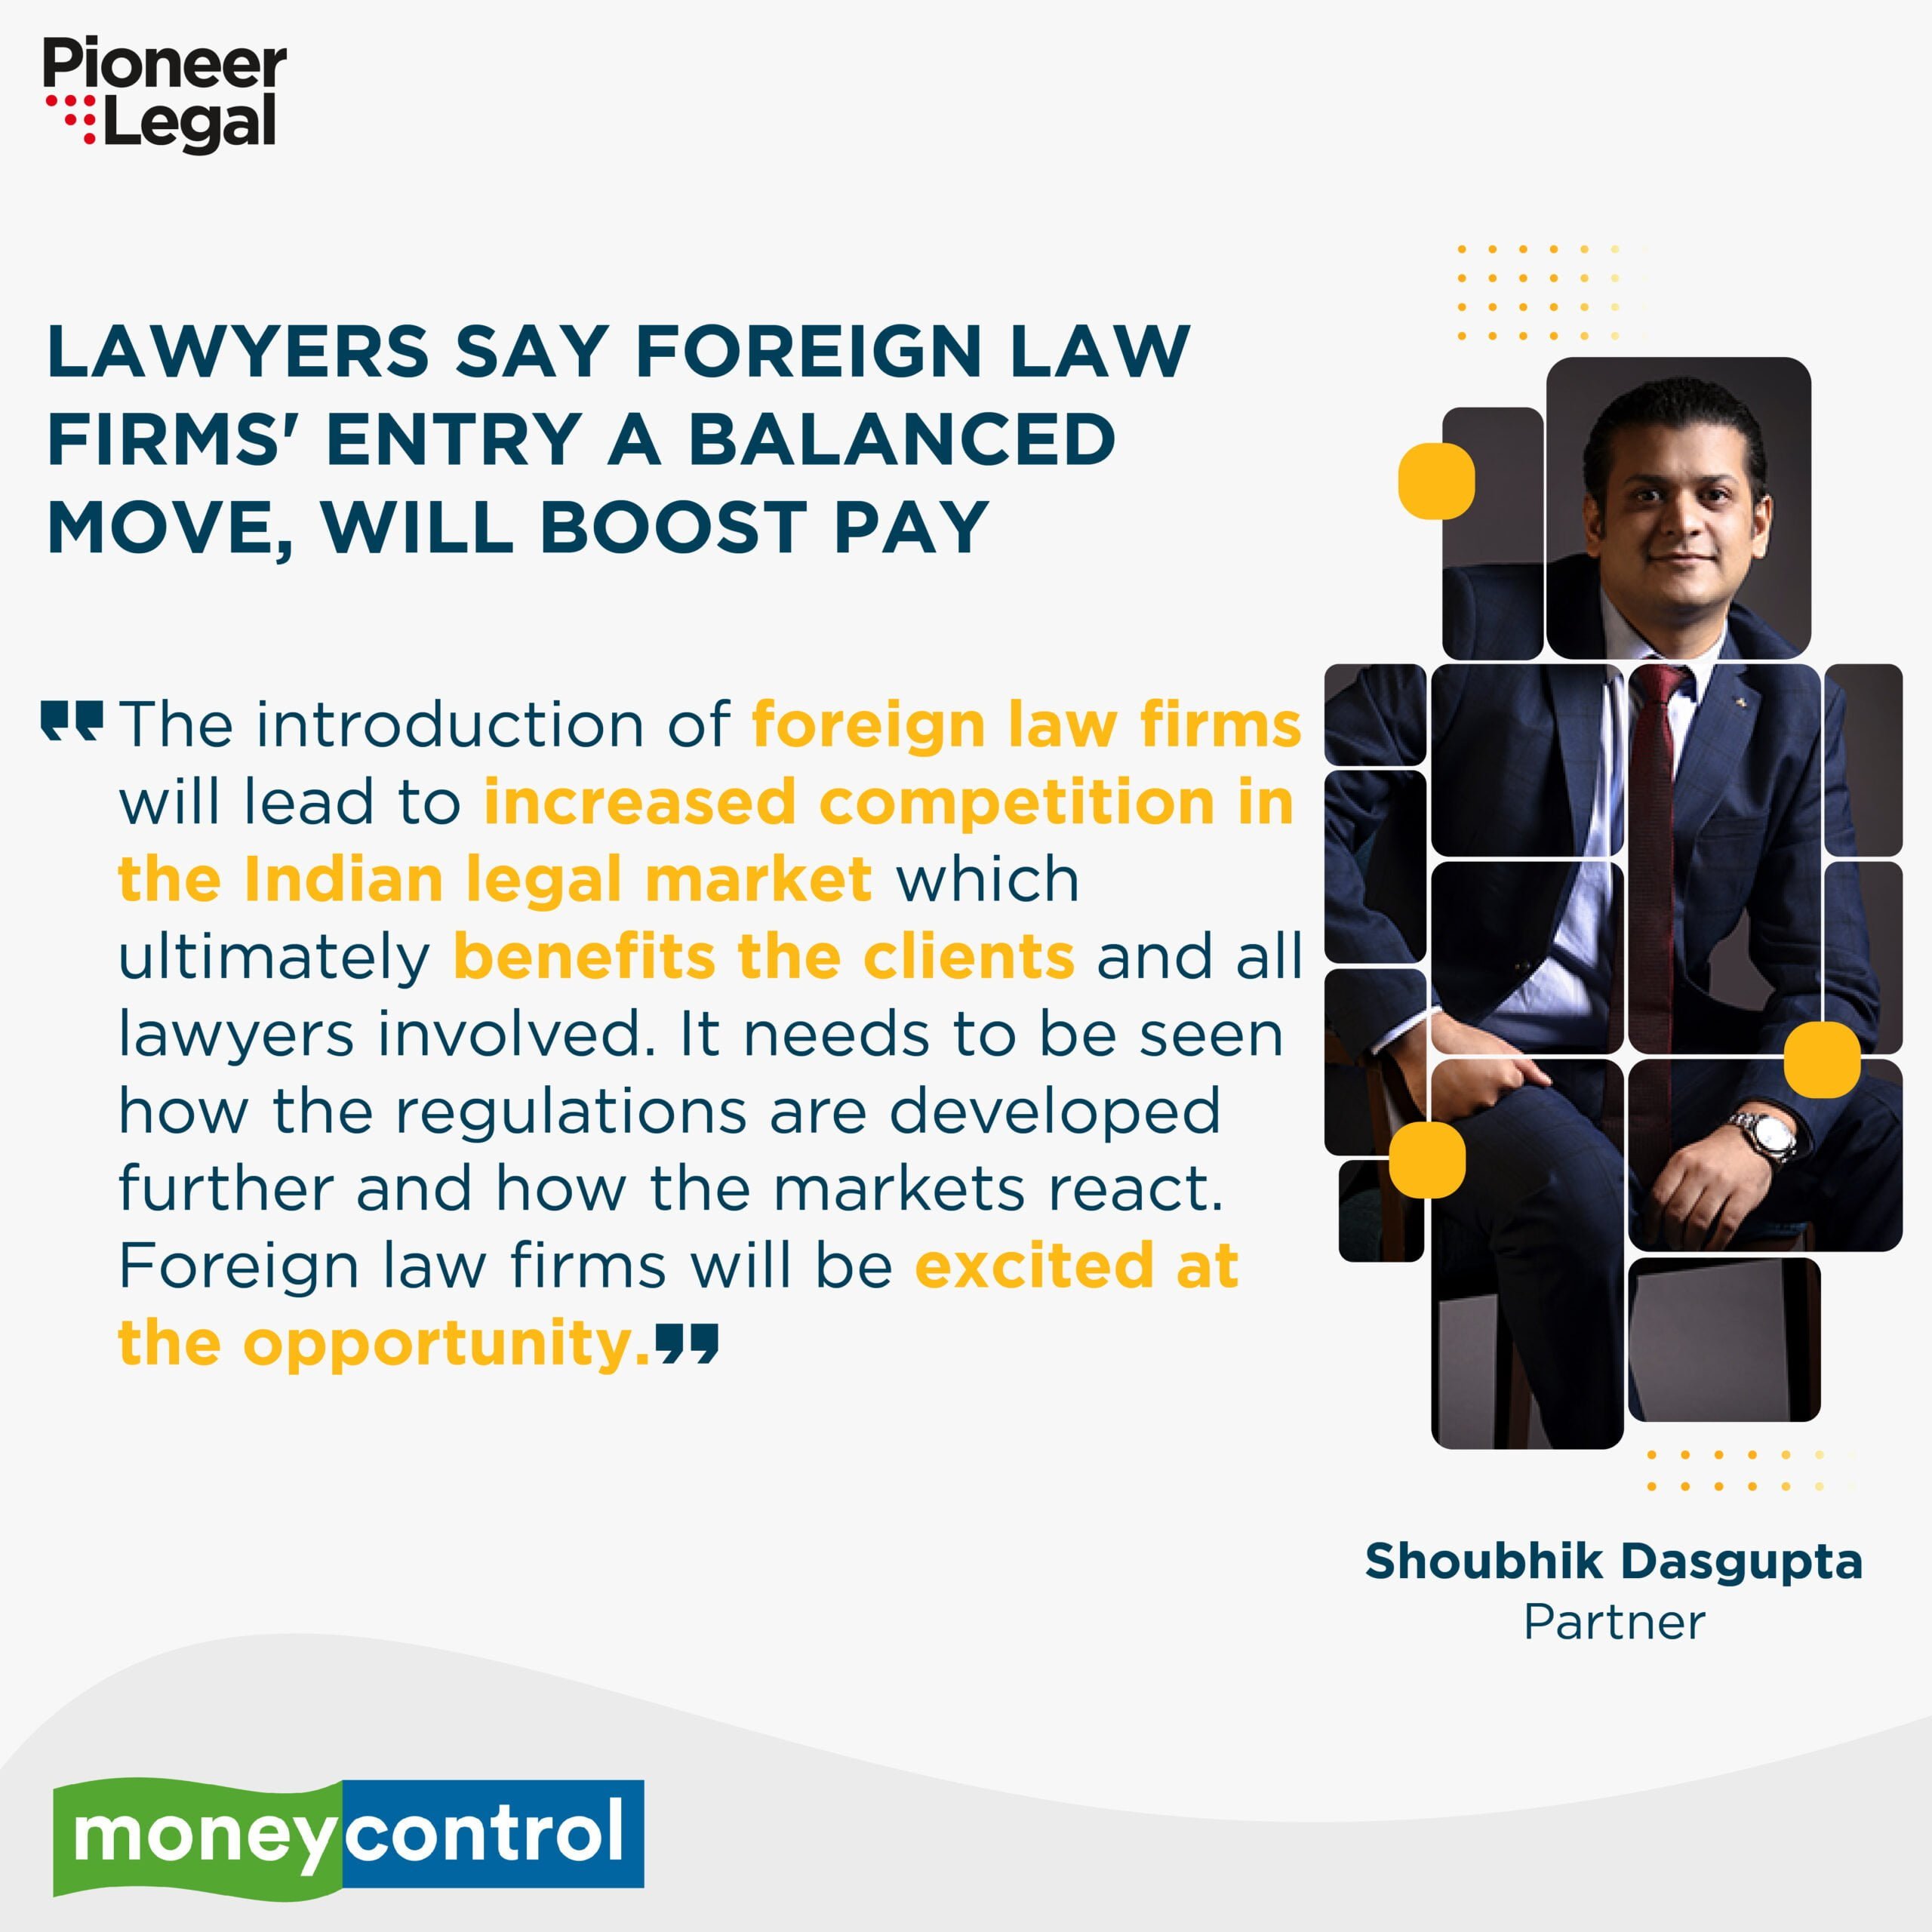 Pioneer Legal - Lawyers say foreign law firms’ entry a balanced move, will boost pay